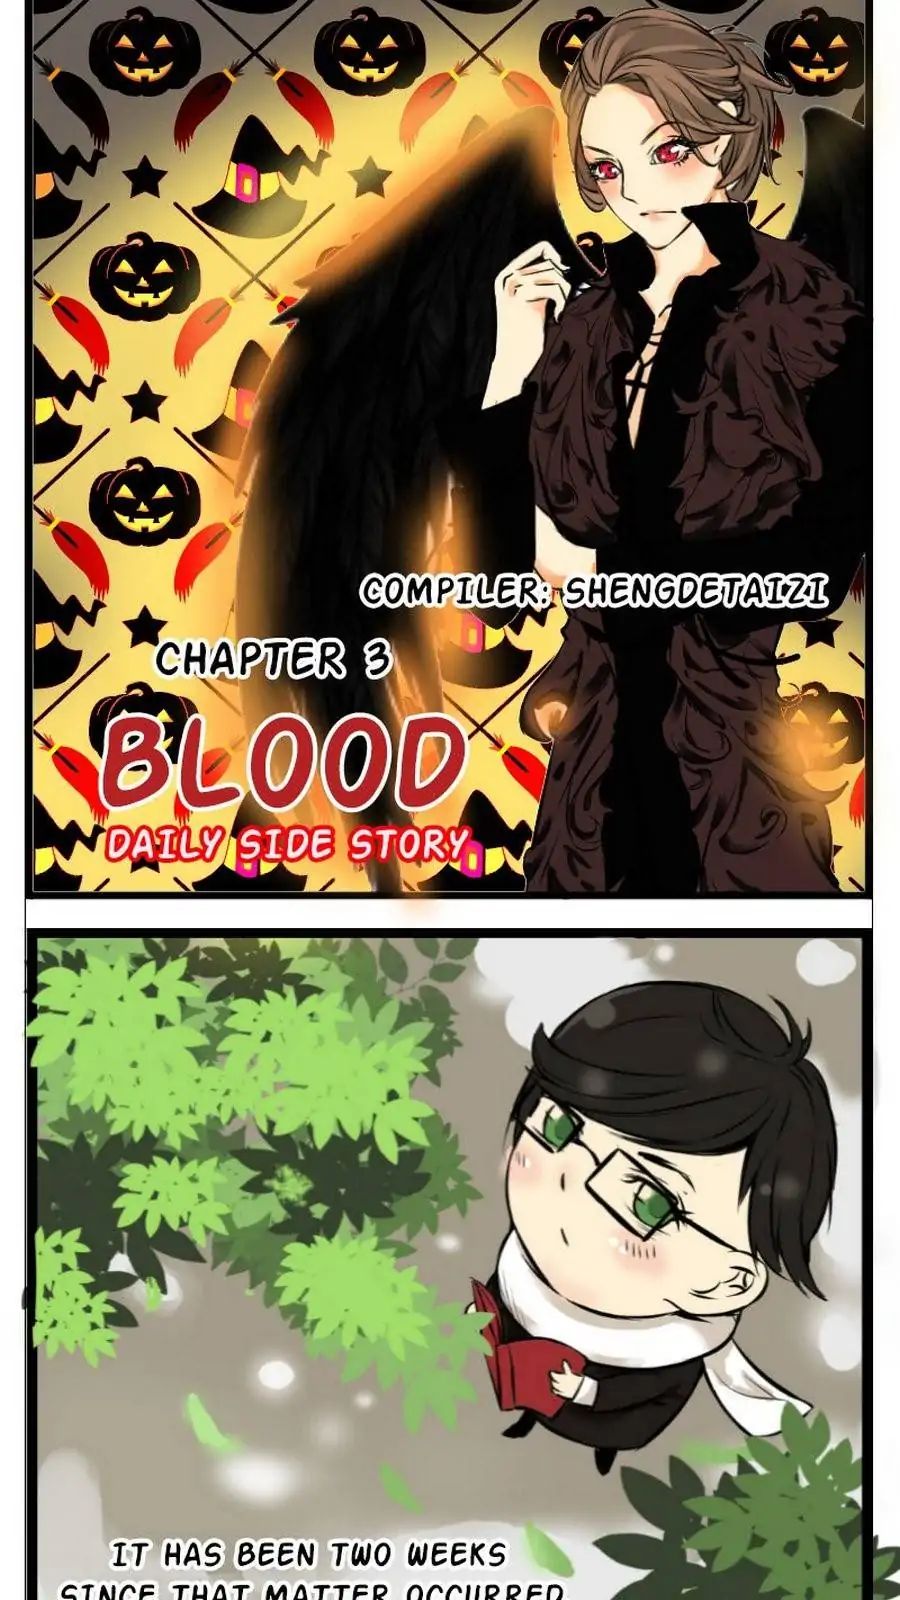 Blood Vampire Lord - Page 1